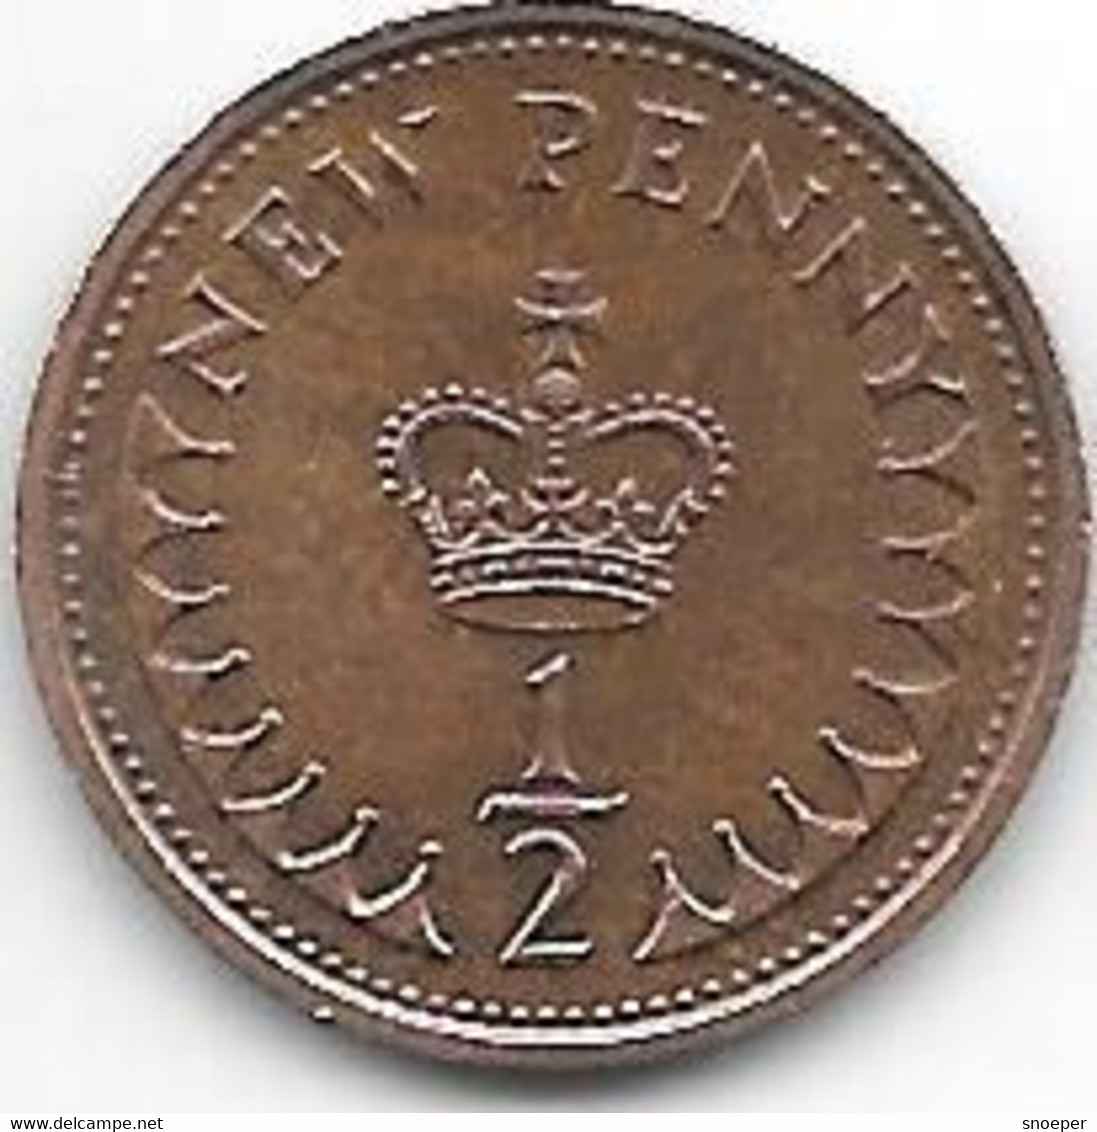 Great Britain 1/2 Penny 1975  Km 914  Unc/ms63 - 1/2 Penny & 1/2 New Penny